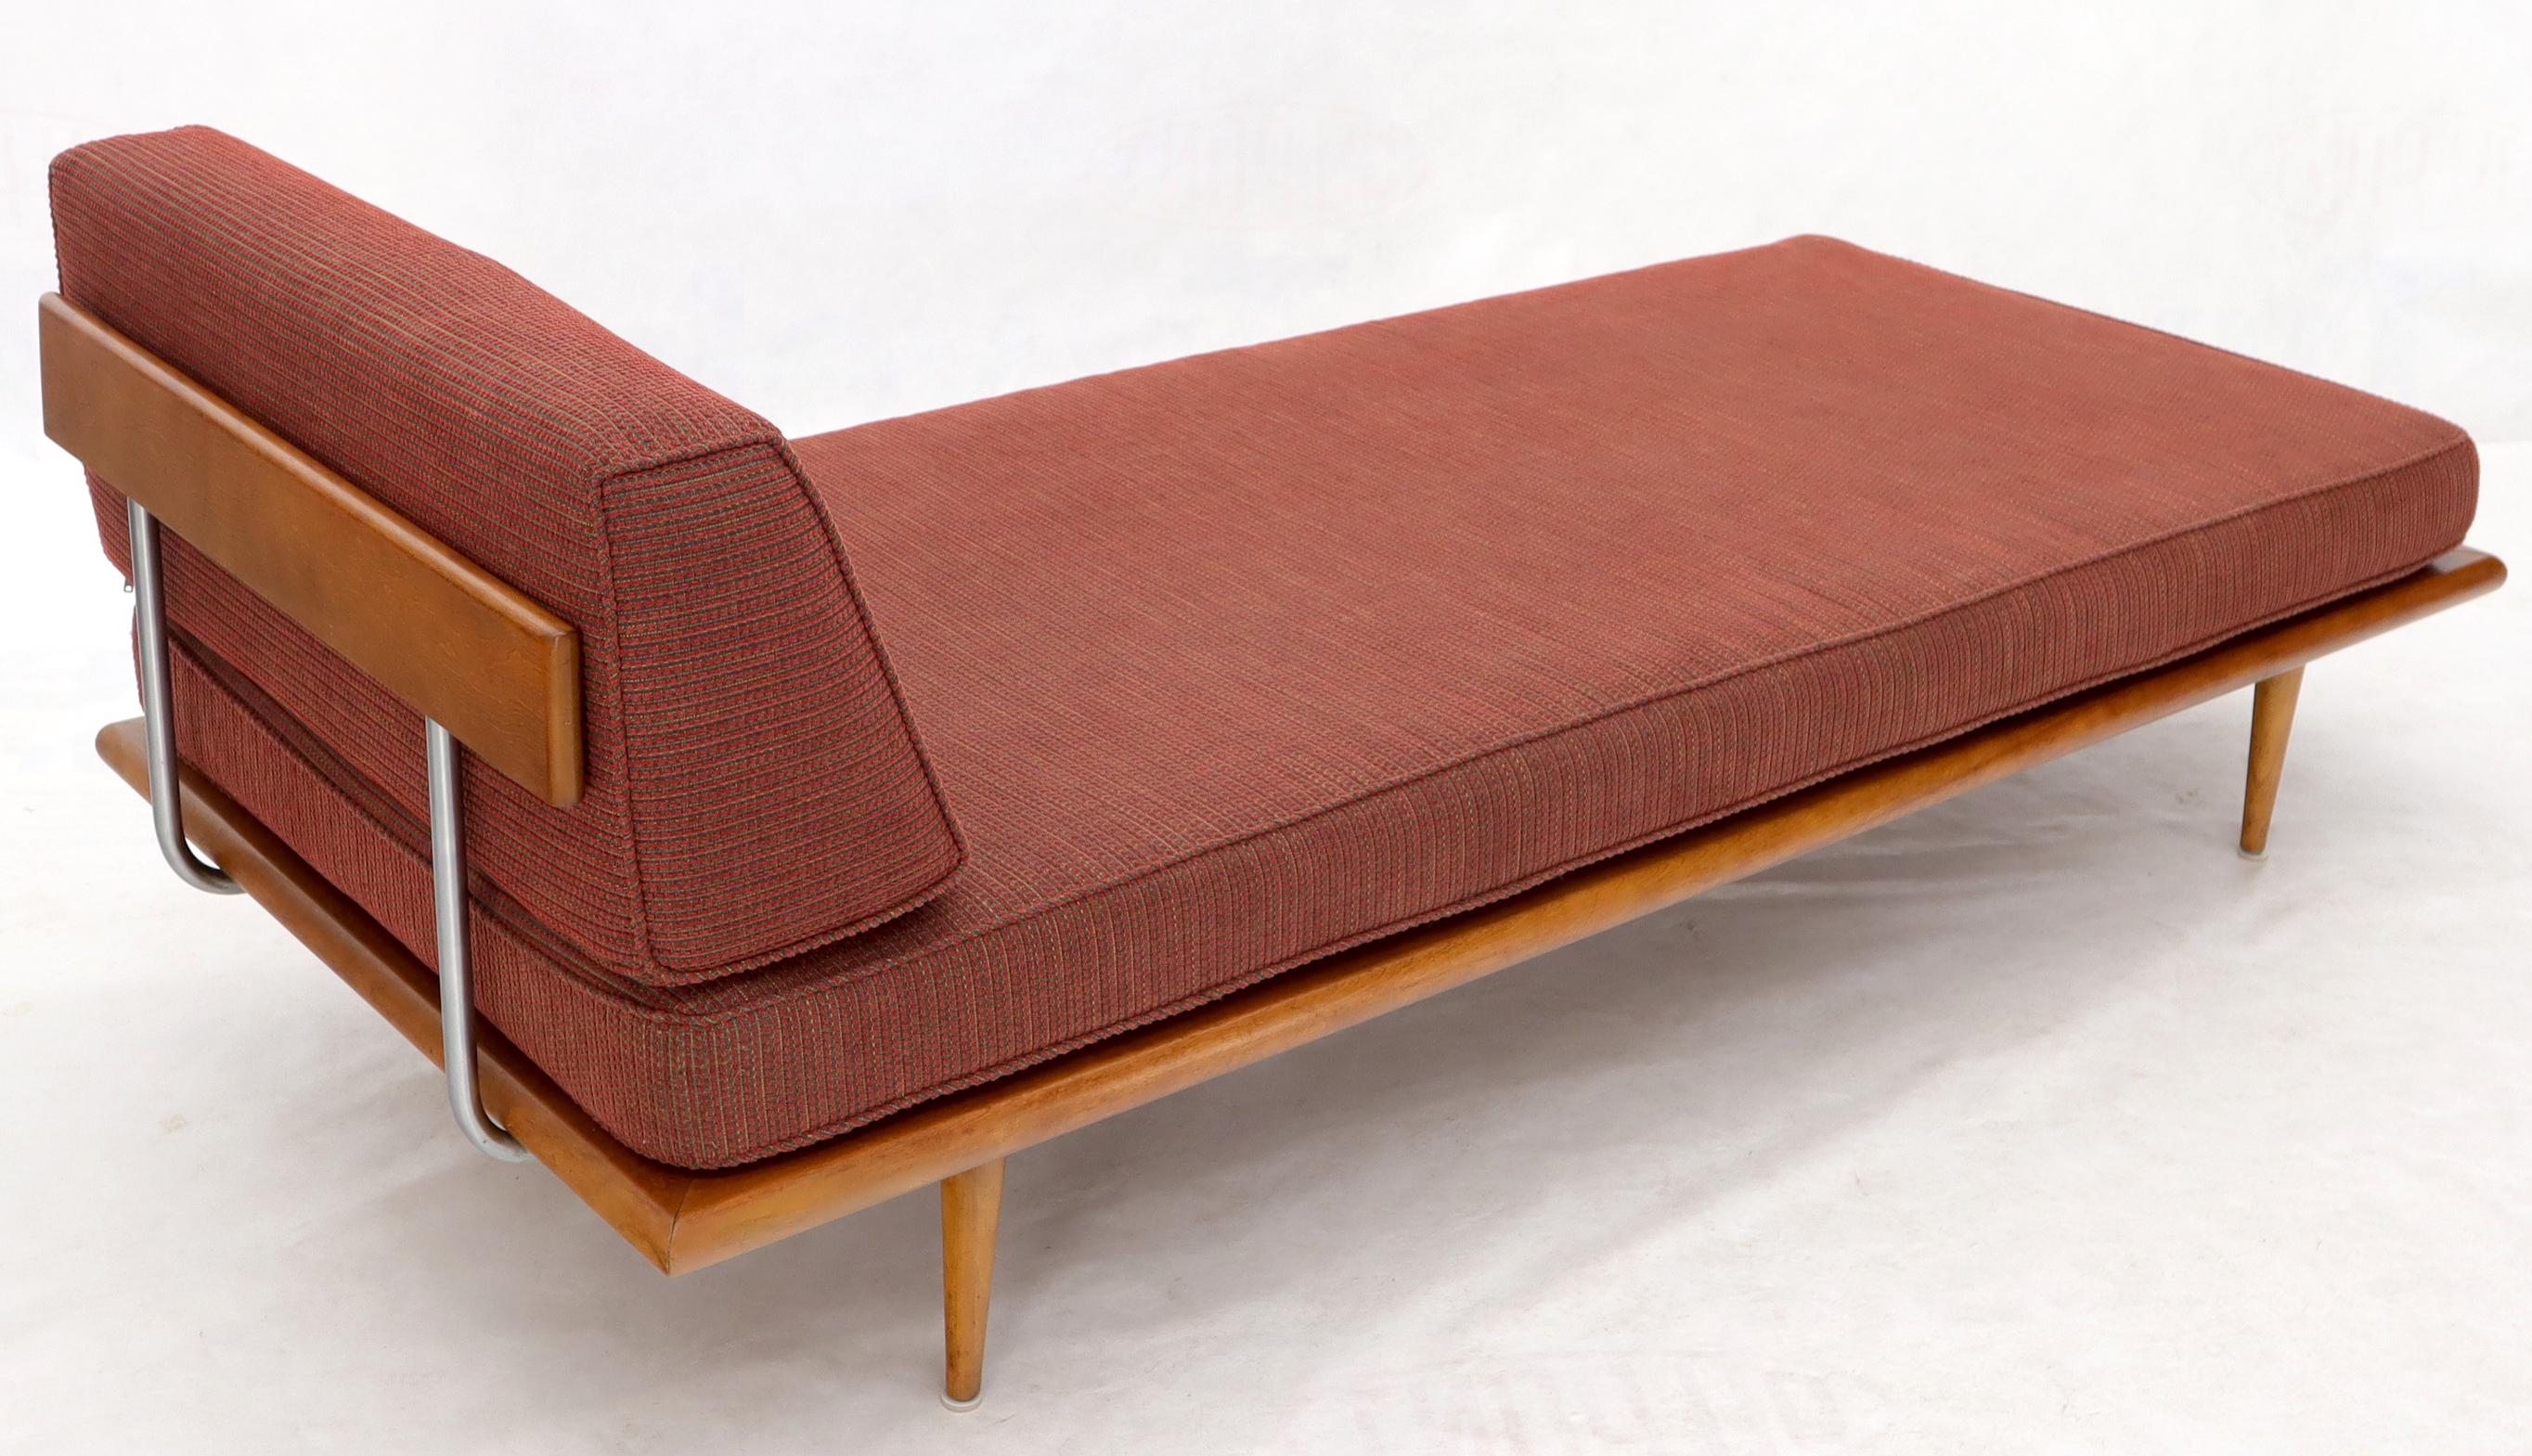 Vintage George Nelson für Herman Miller Daybed Cot Sofa Chaise Lounge (Ahornholz)